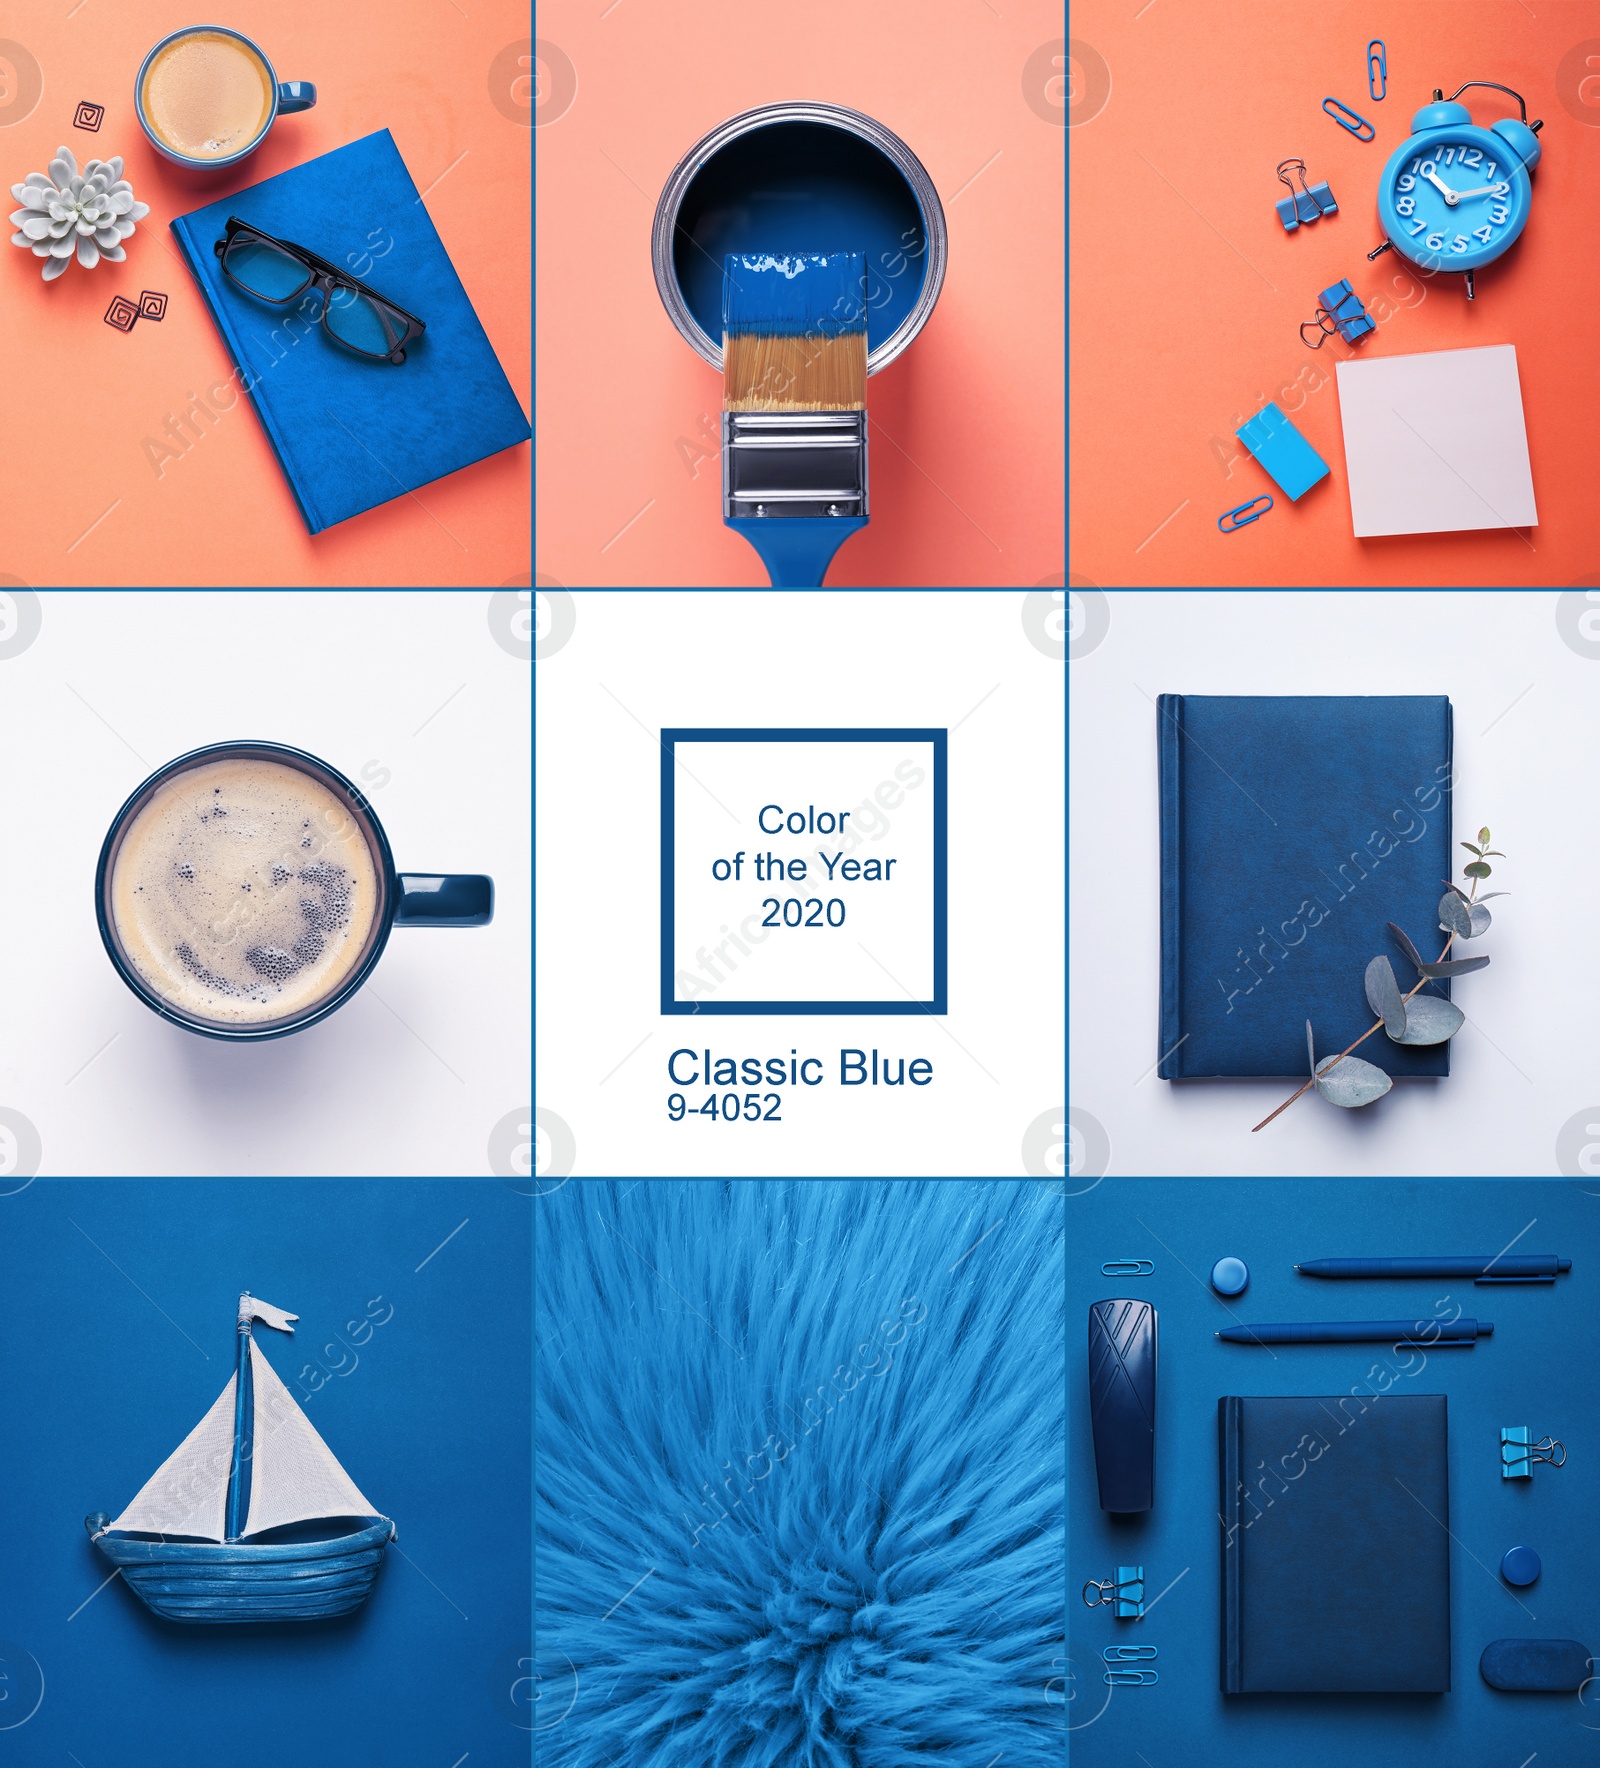 Image of Collage made with photos inspired by color of the year 2020 (Classic blue)